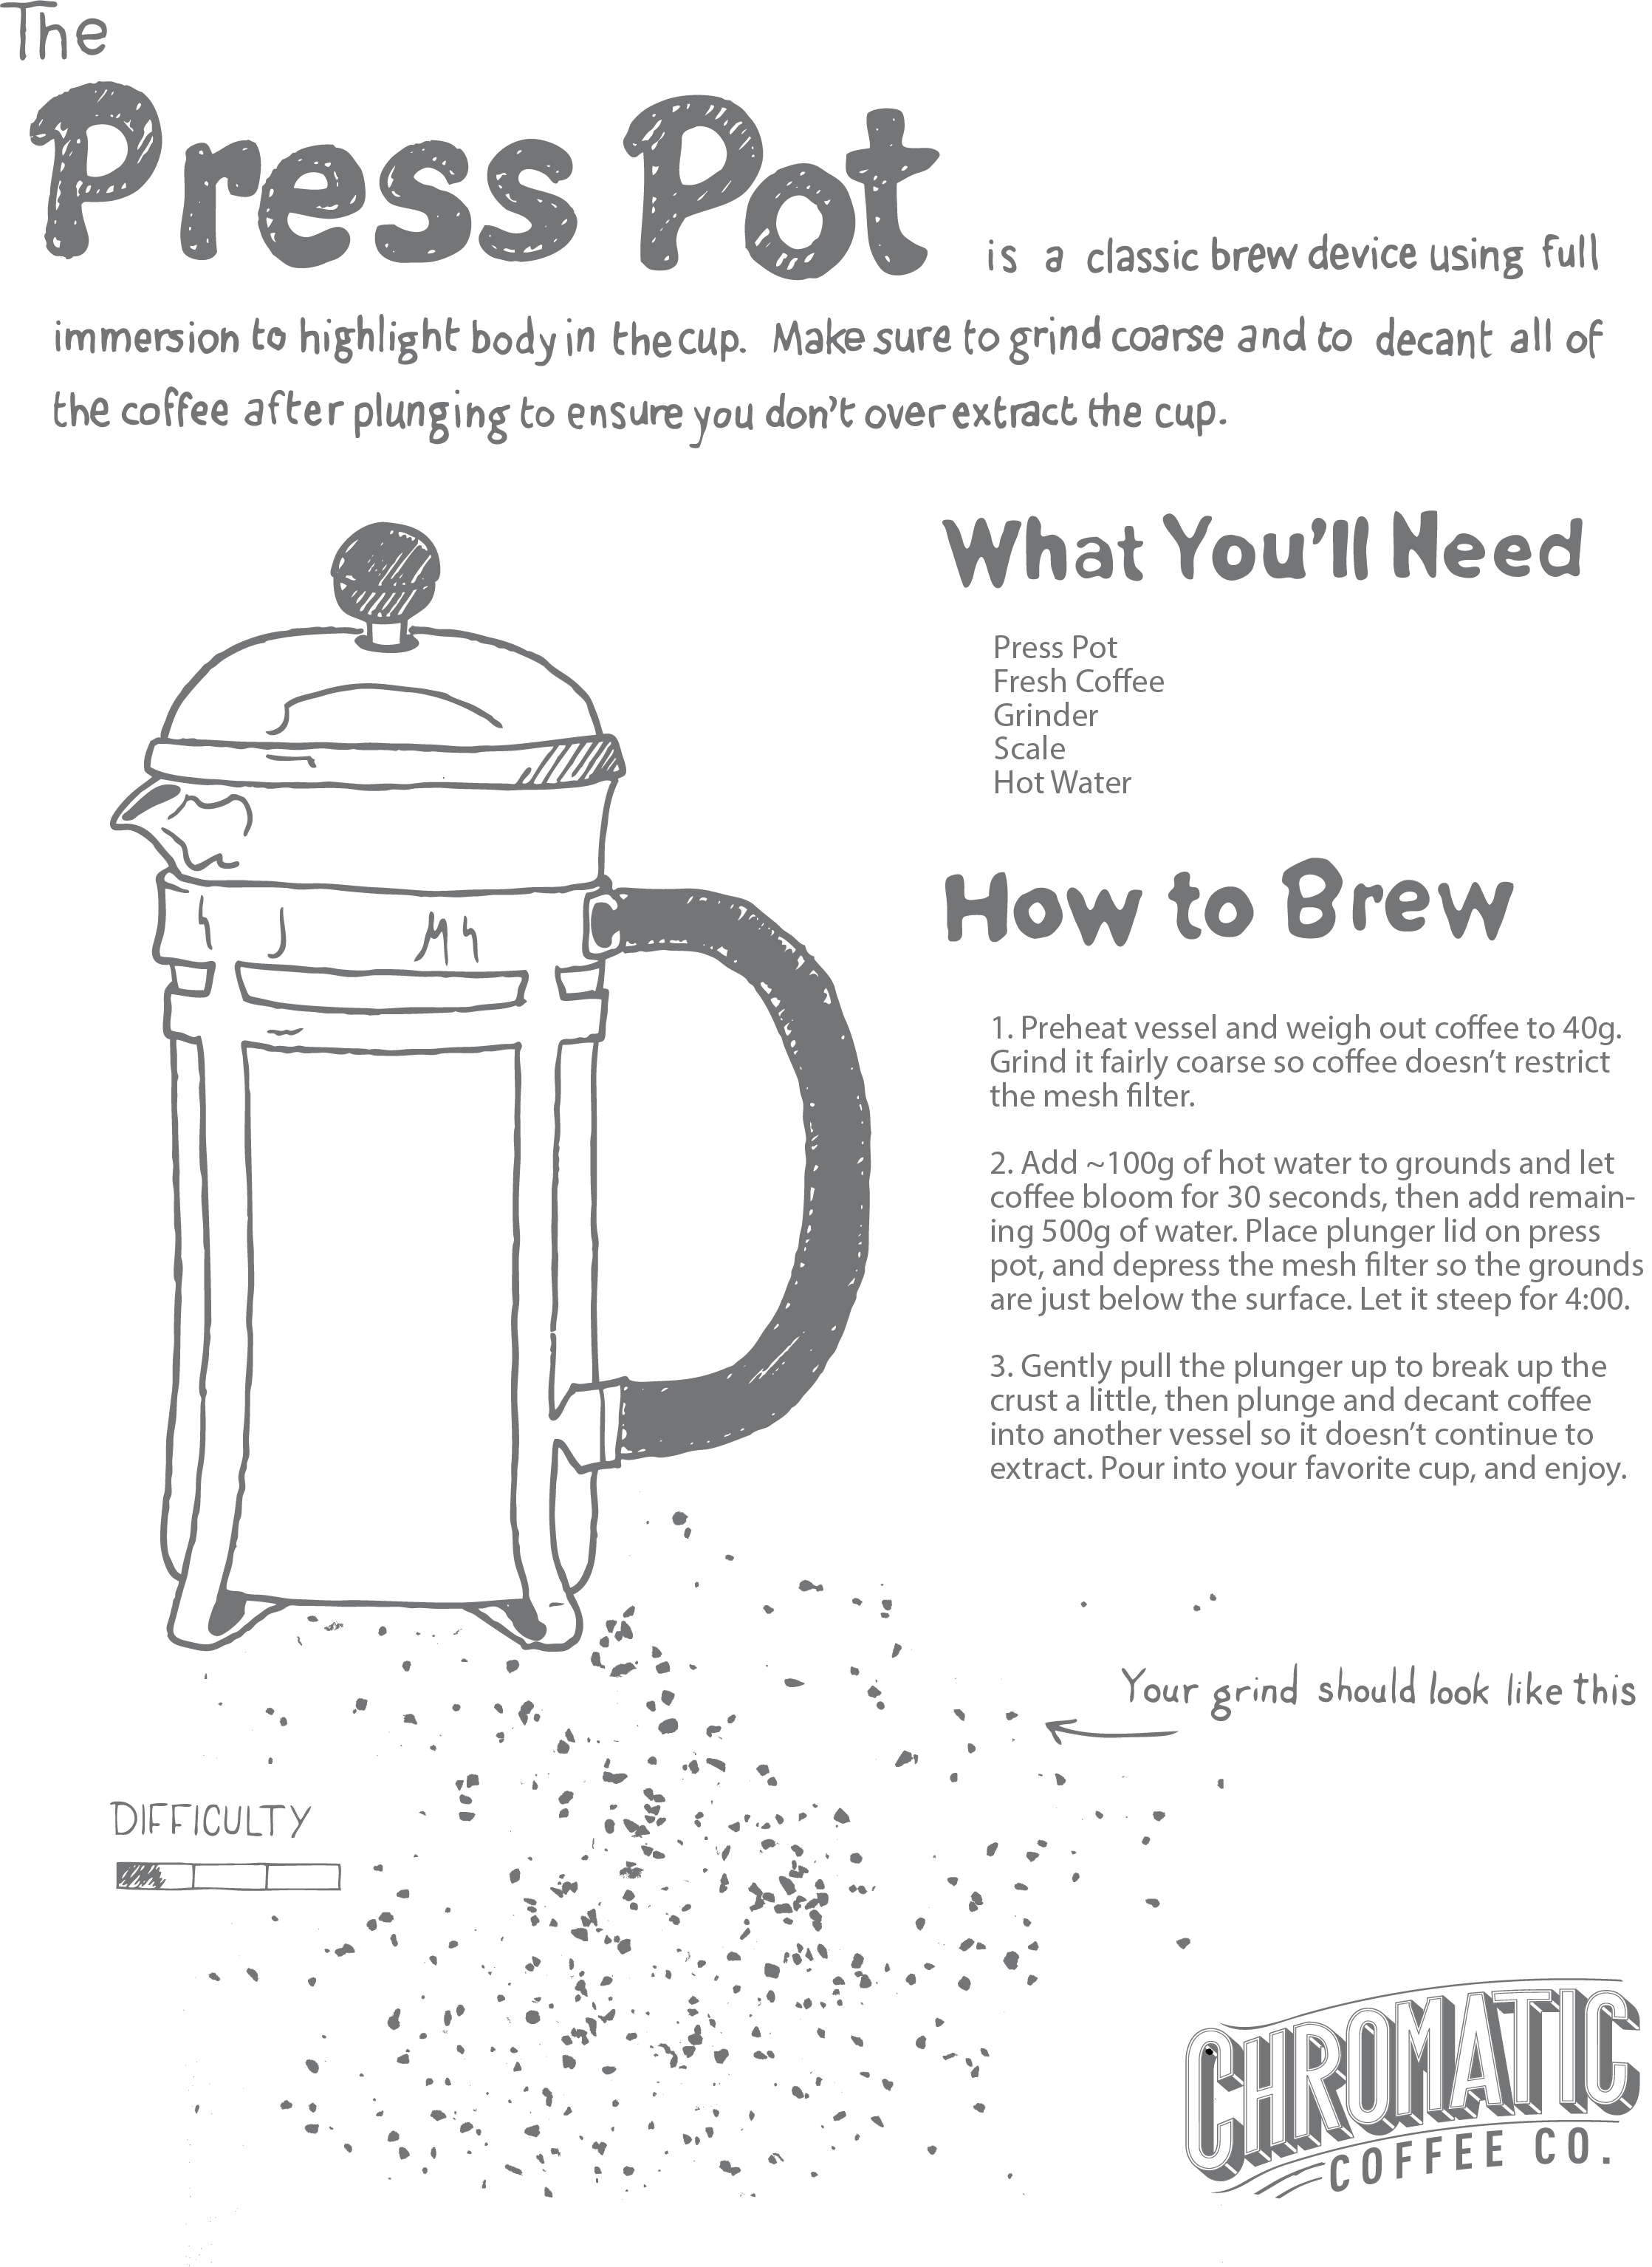 French Press Brewing Guide: How to Make French Press Coffee